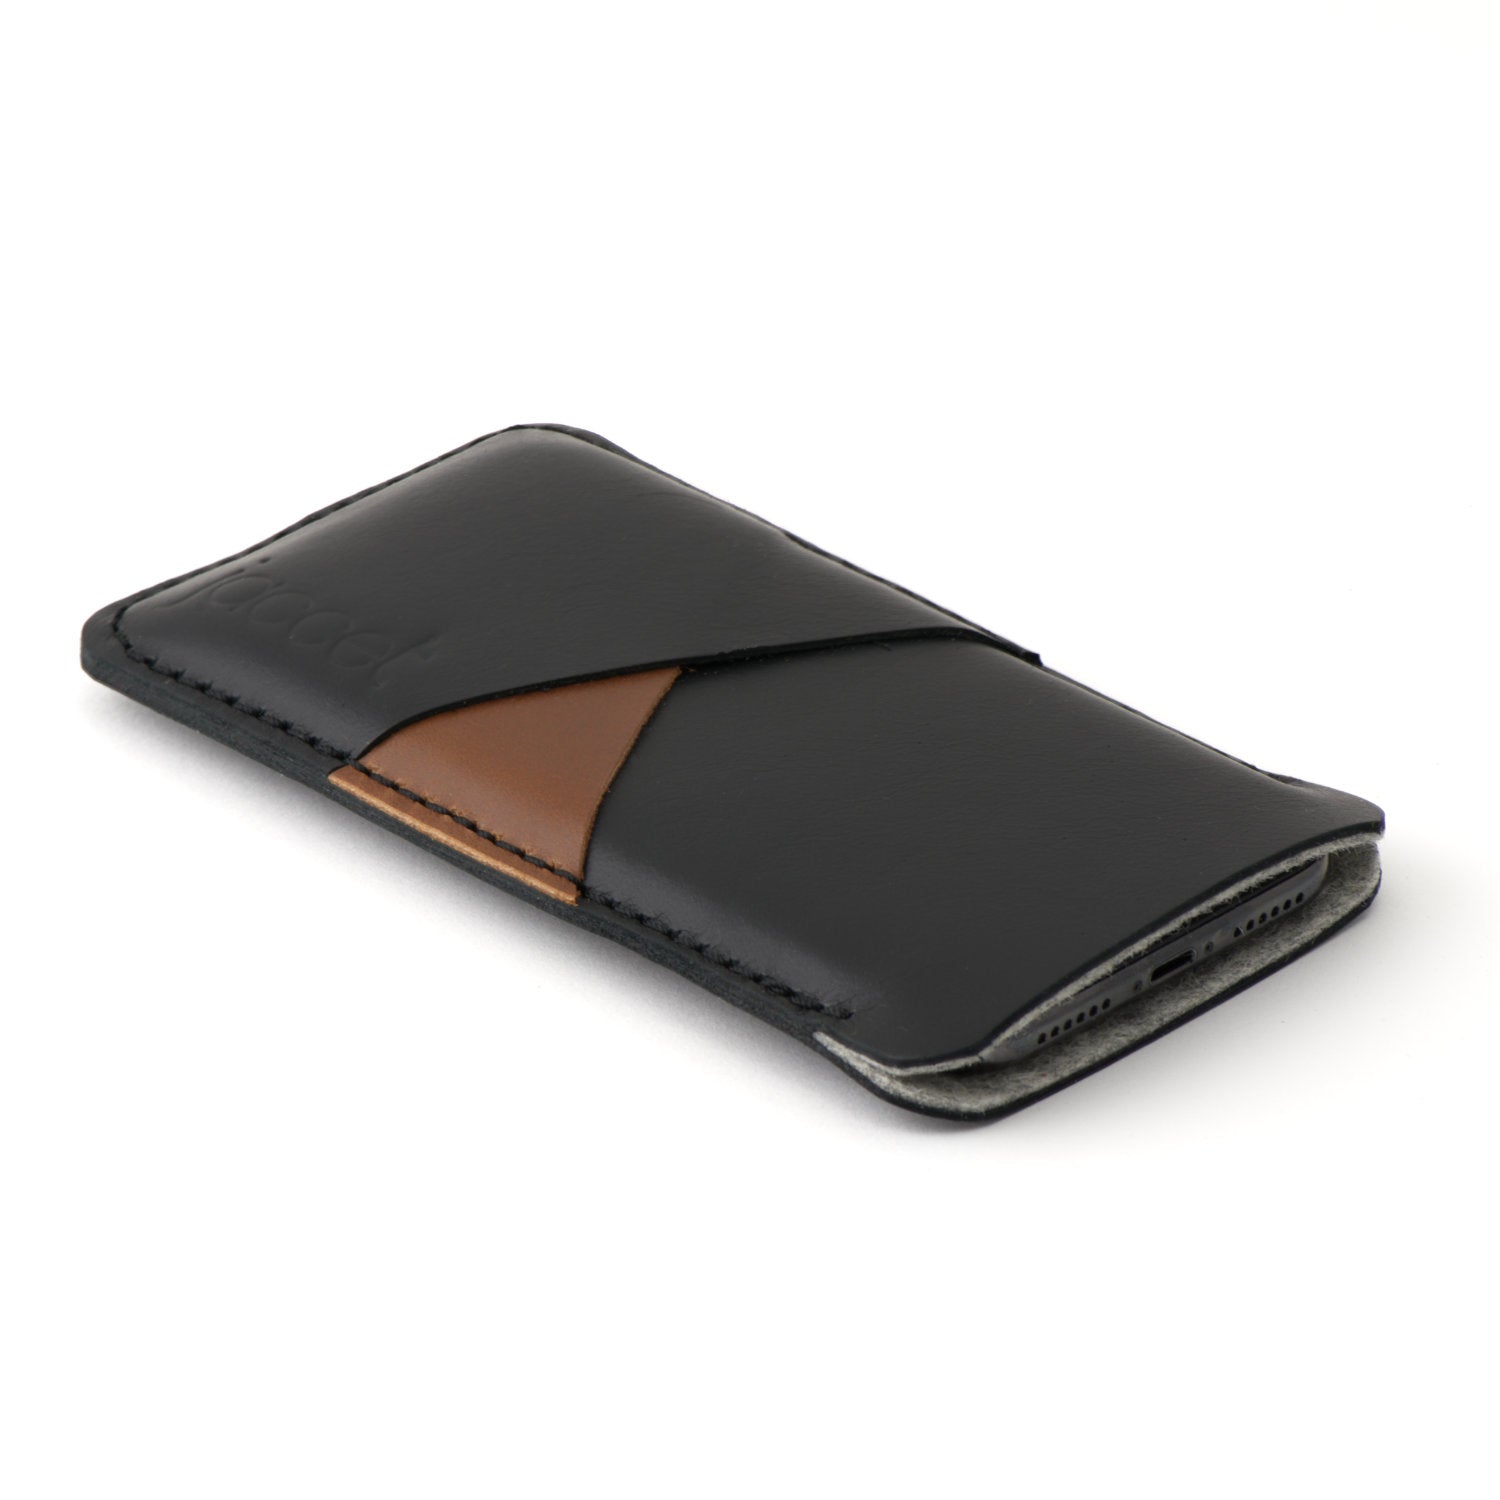 Full-grain leather OPPO sleeve - Black leather with two pockets voor cards